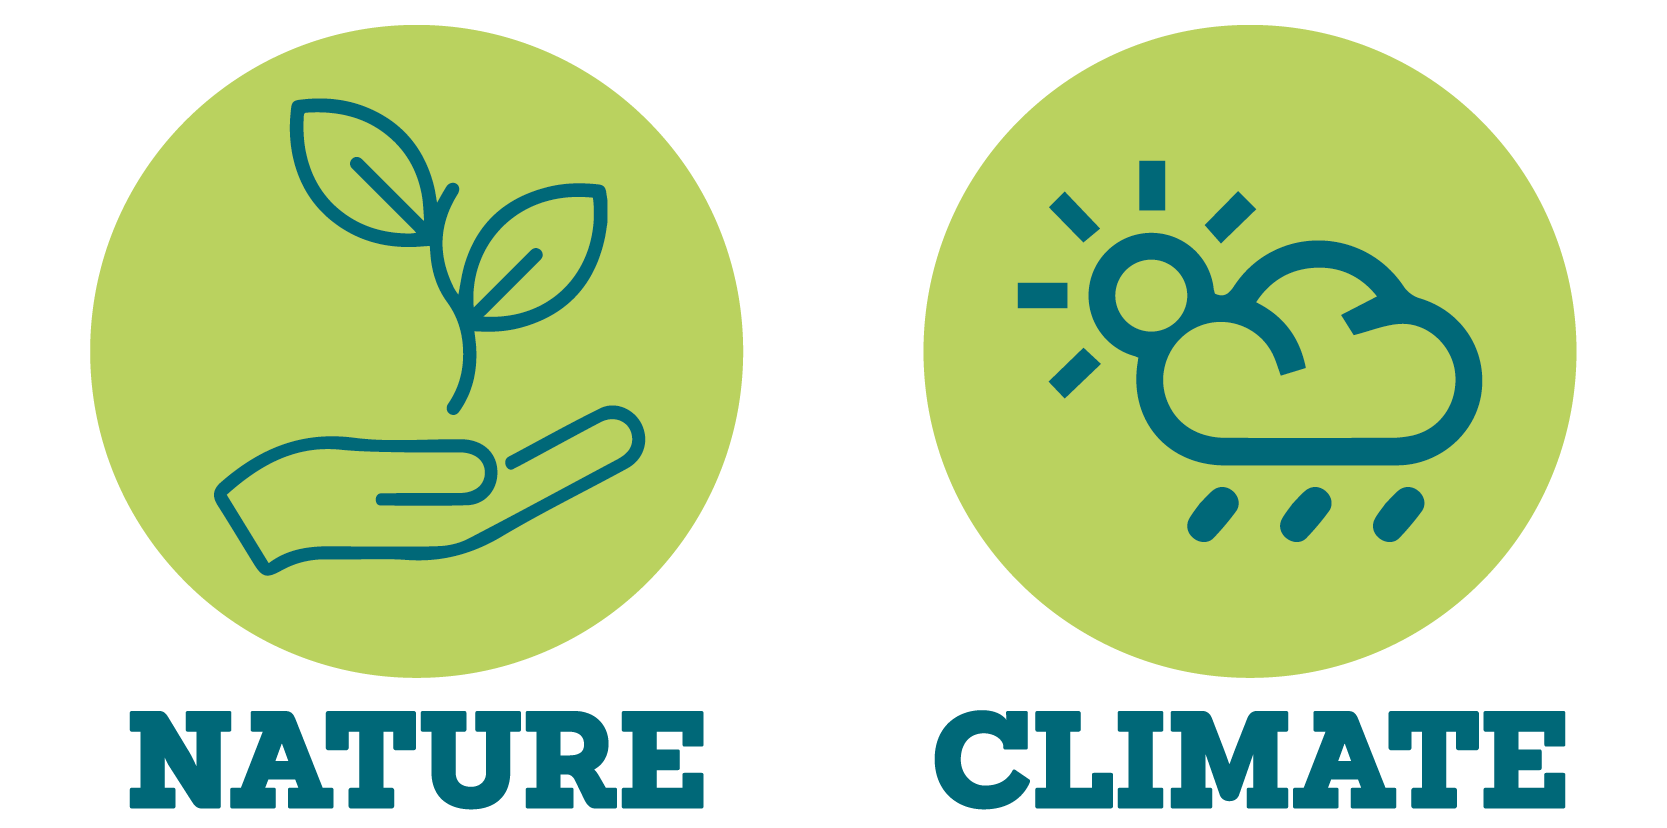 Logo of a palm holding a plant with the word 'nature' underneath alongside a logo of a sun and a rain cloud with the word 'climate' underneath